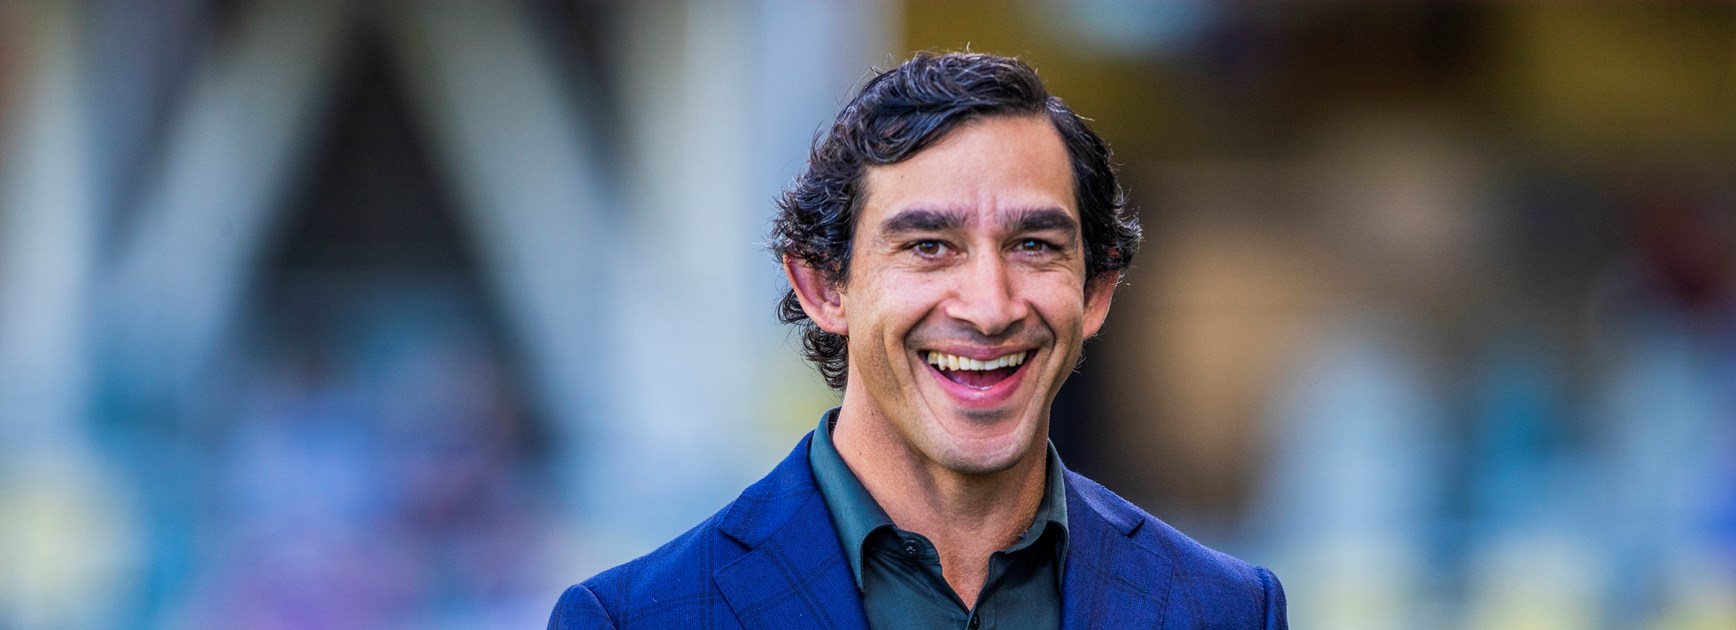 Johnathan Thurston inducted into Sport Australia Hall of Fame